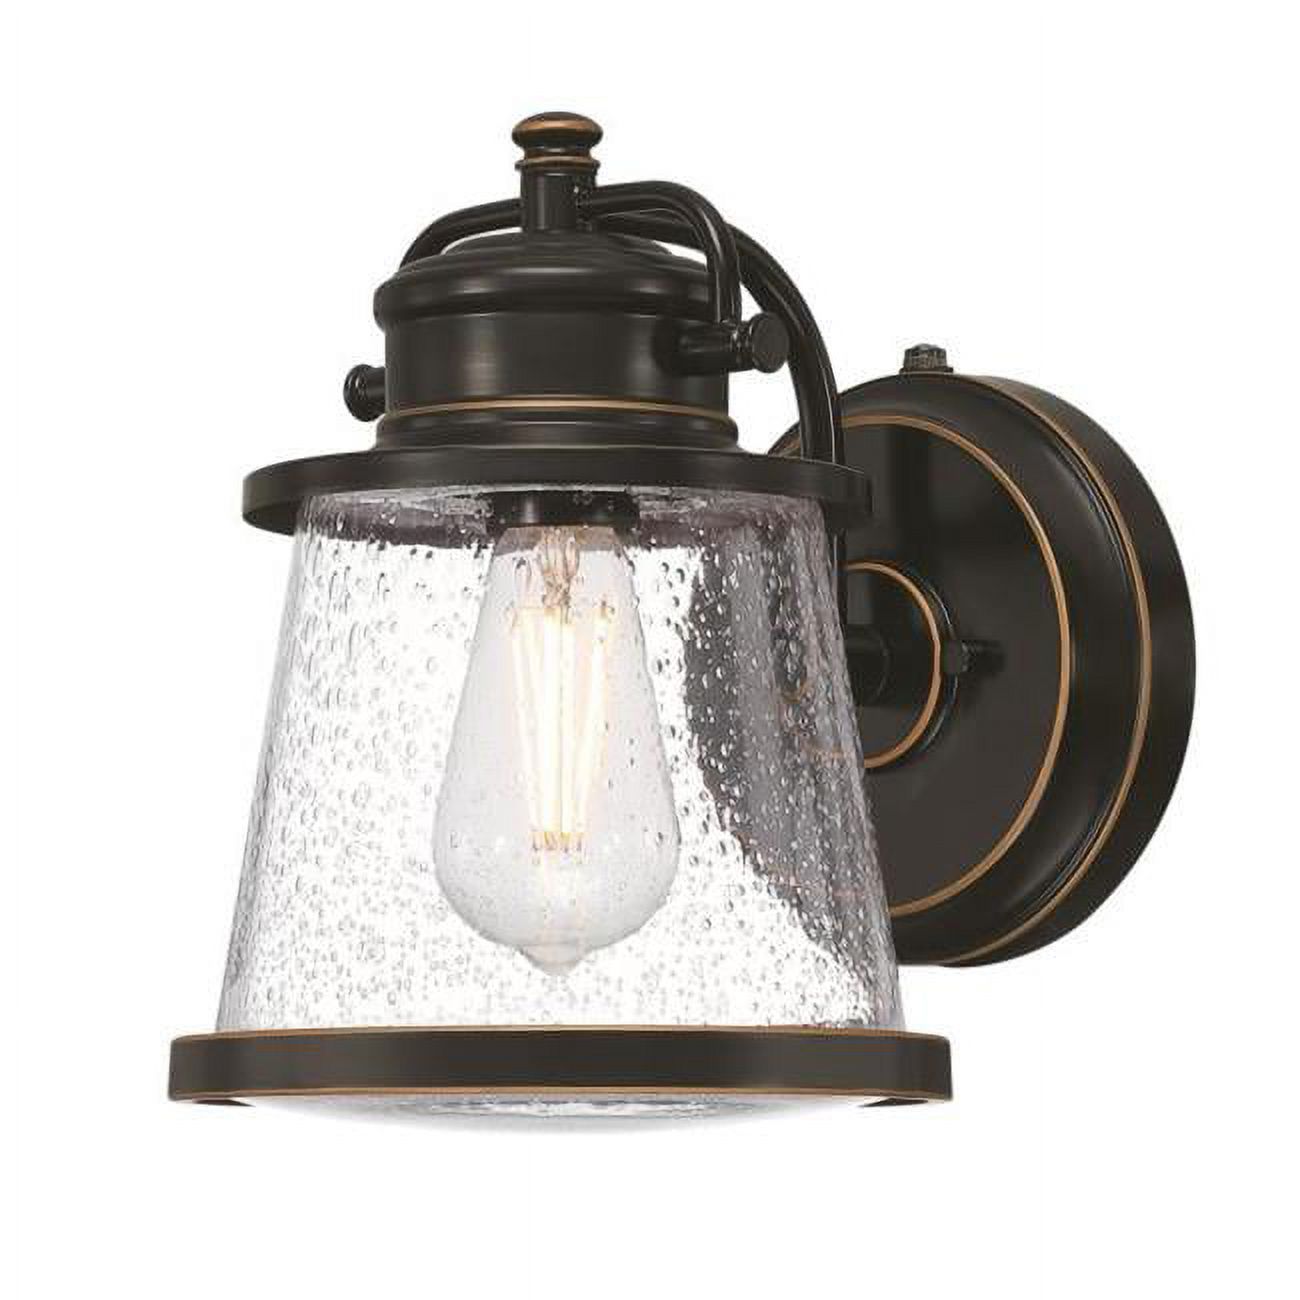 Westinghouse Westinghouse Lighting 6121500 Emma Jane Vintage-Style One Light Outdoor Wall Fixture with Dusk to Dawn Sensor, Amber Bronze Finish, Clear Seeded Glass - image 1 of 5